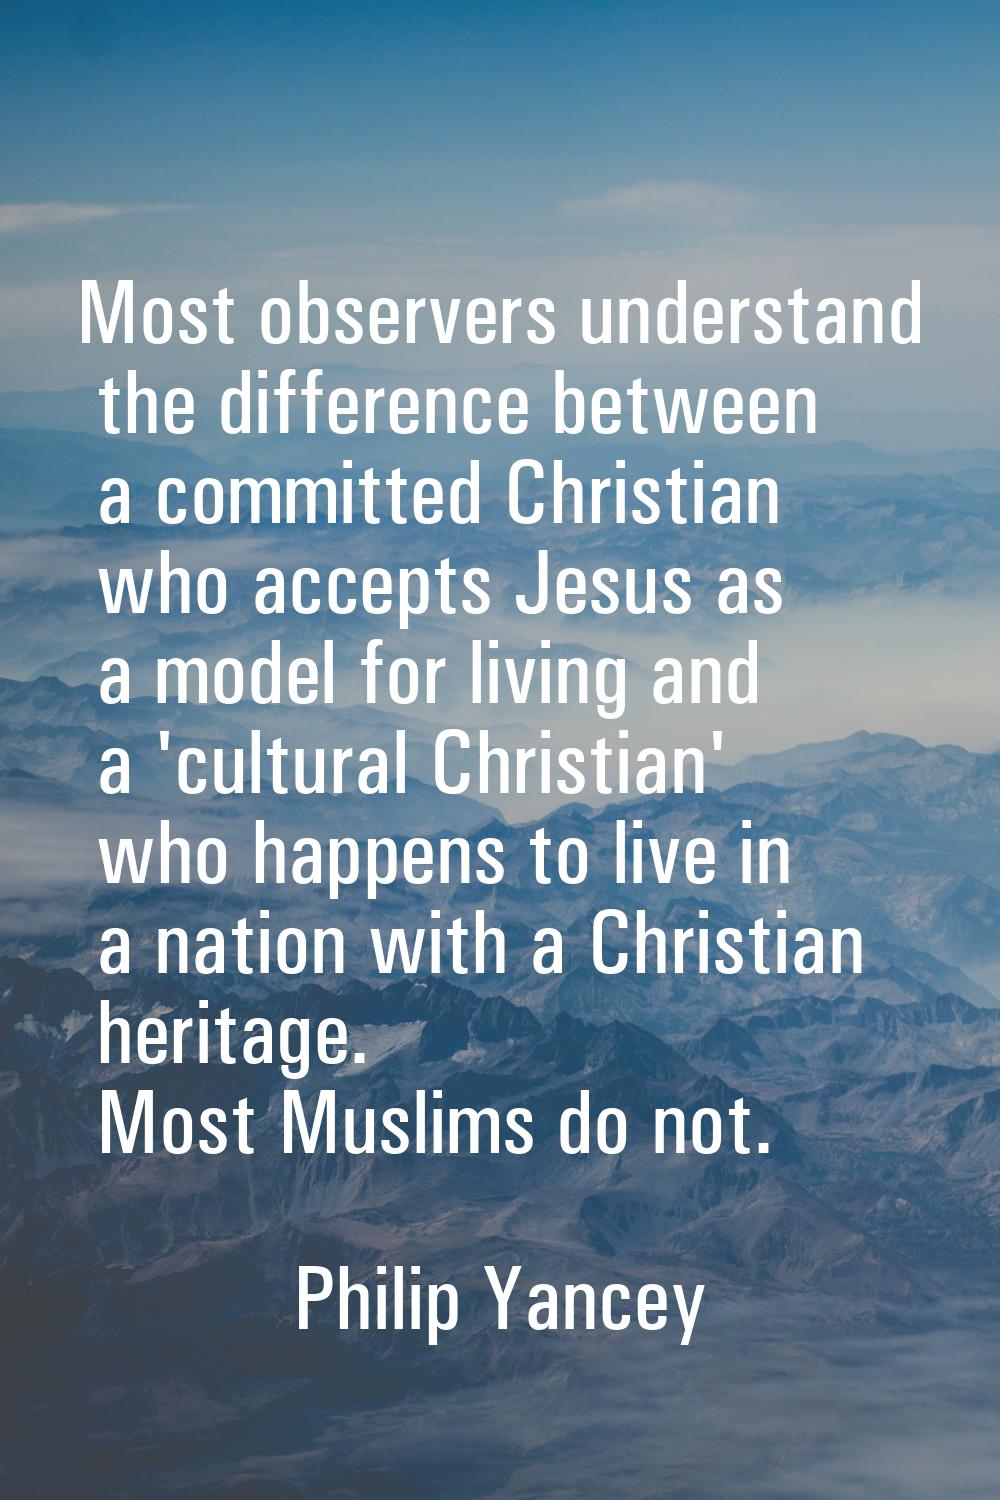 Most observers understand the difference between a committed Christian who accepts Jesus as a model